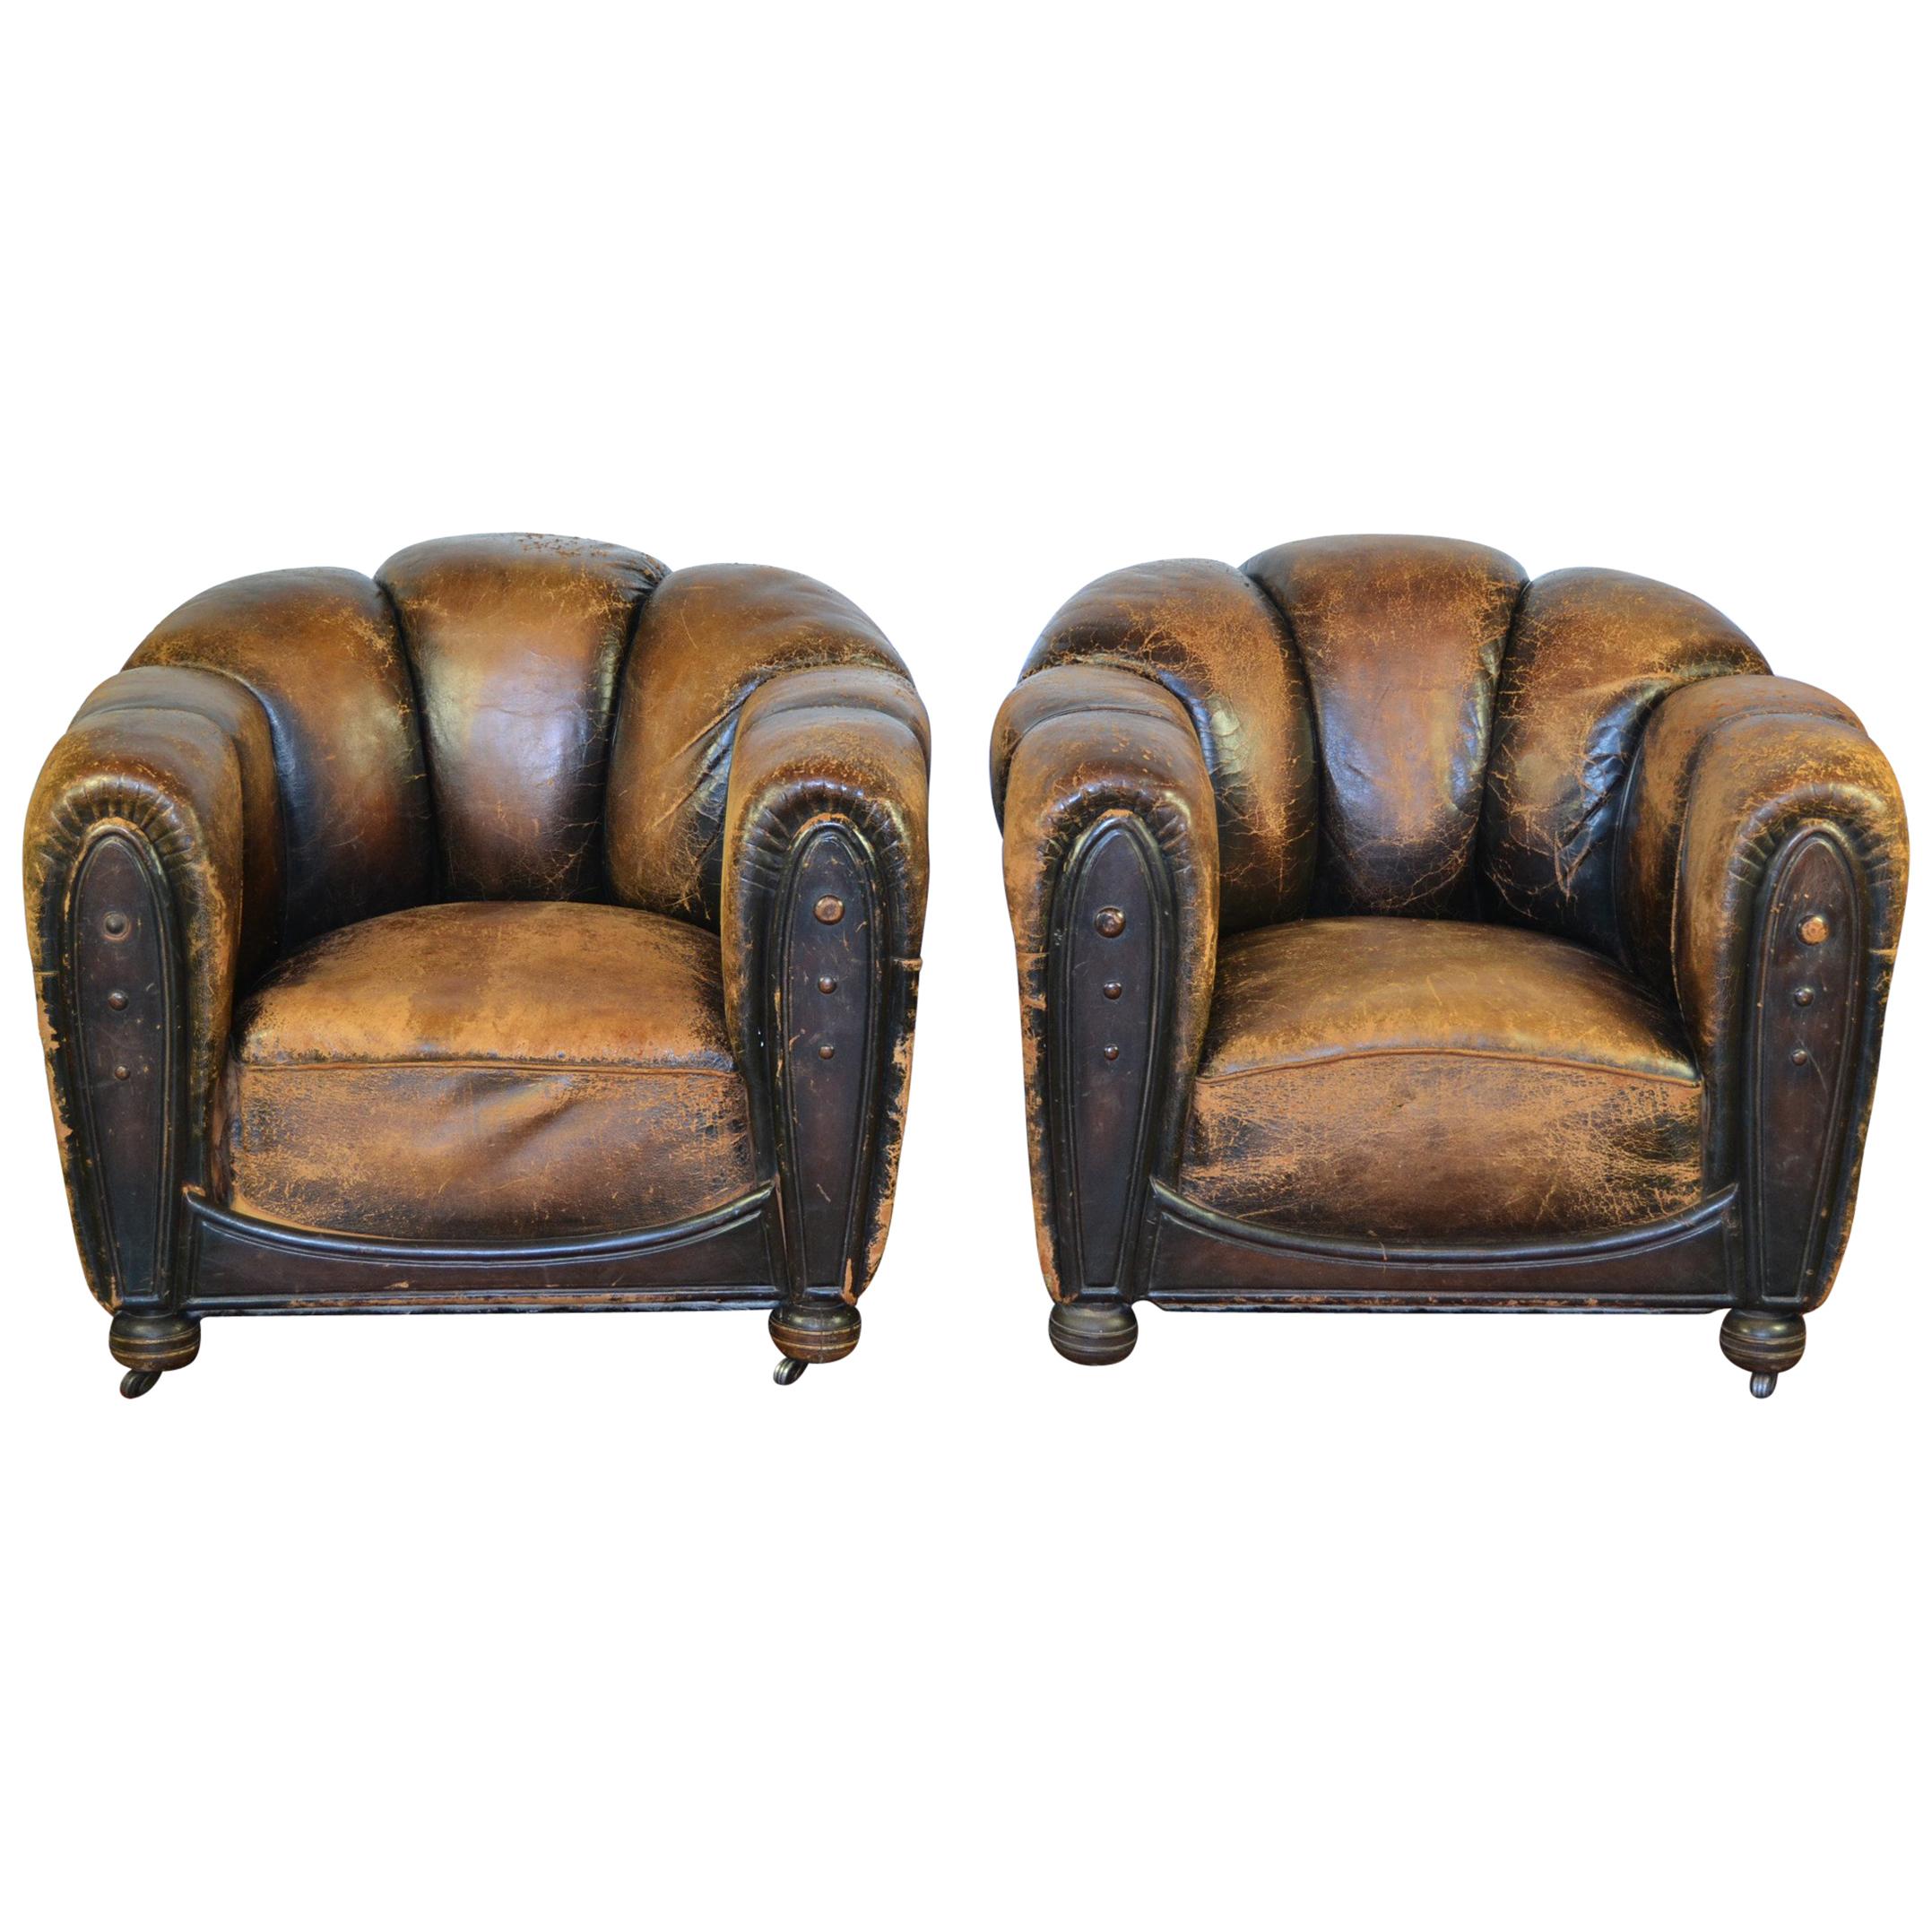 Pair of Art Deco Leather Club Chairs or Armchairs,  Scalloped Back, Aged Patina